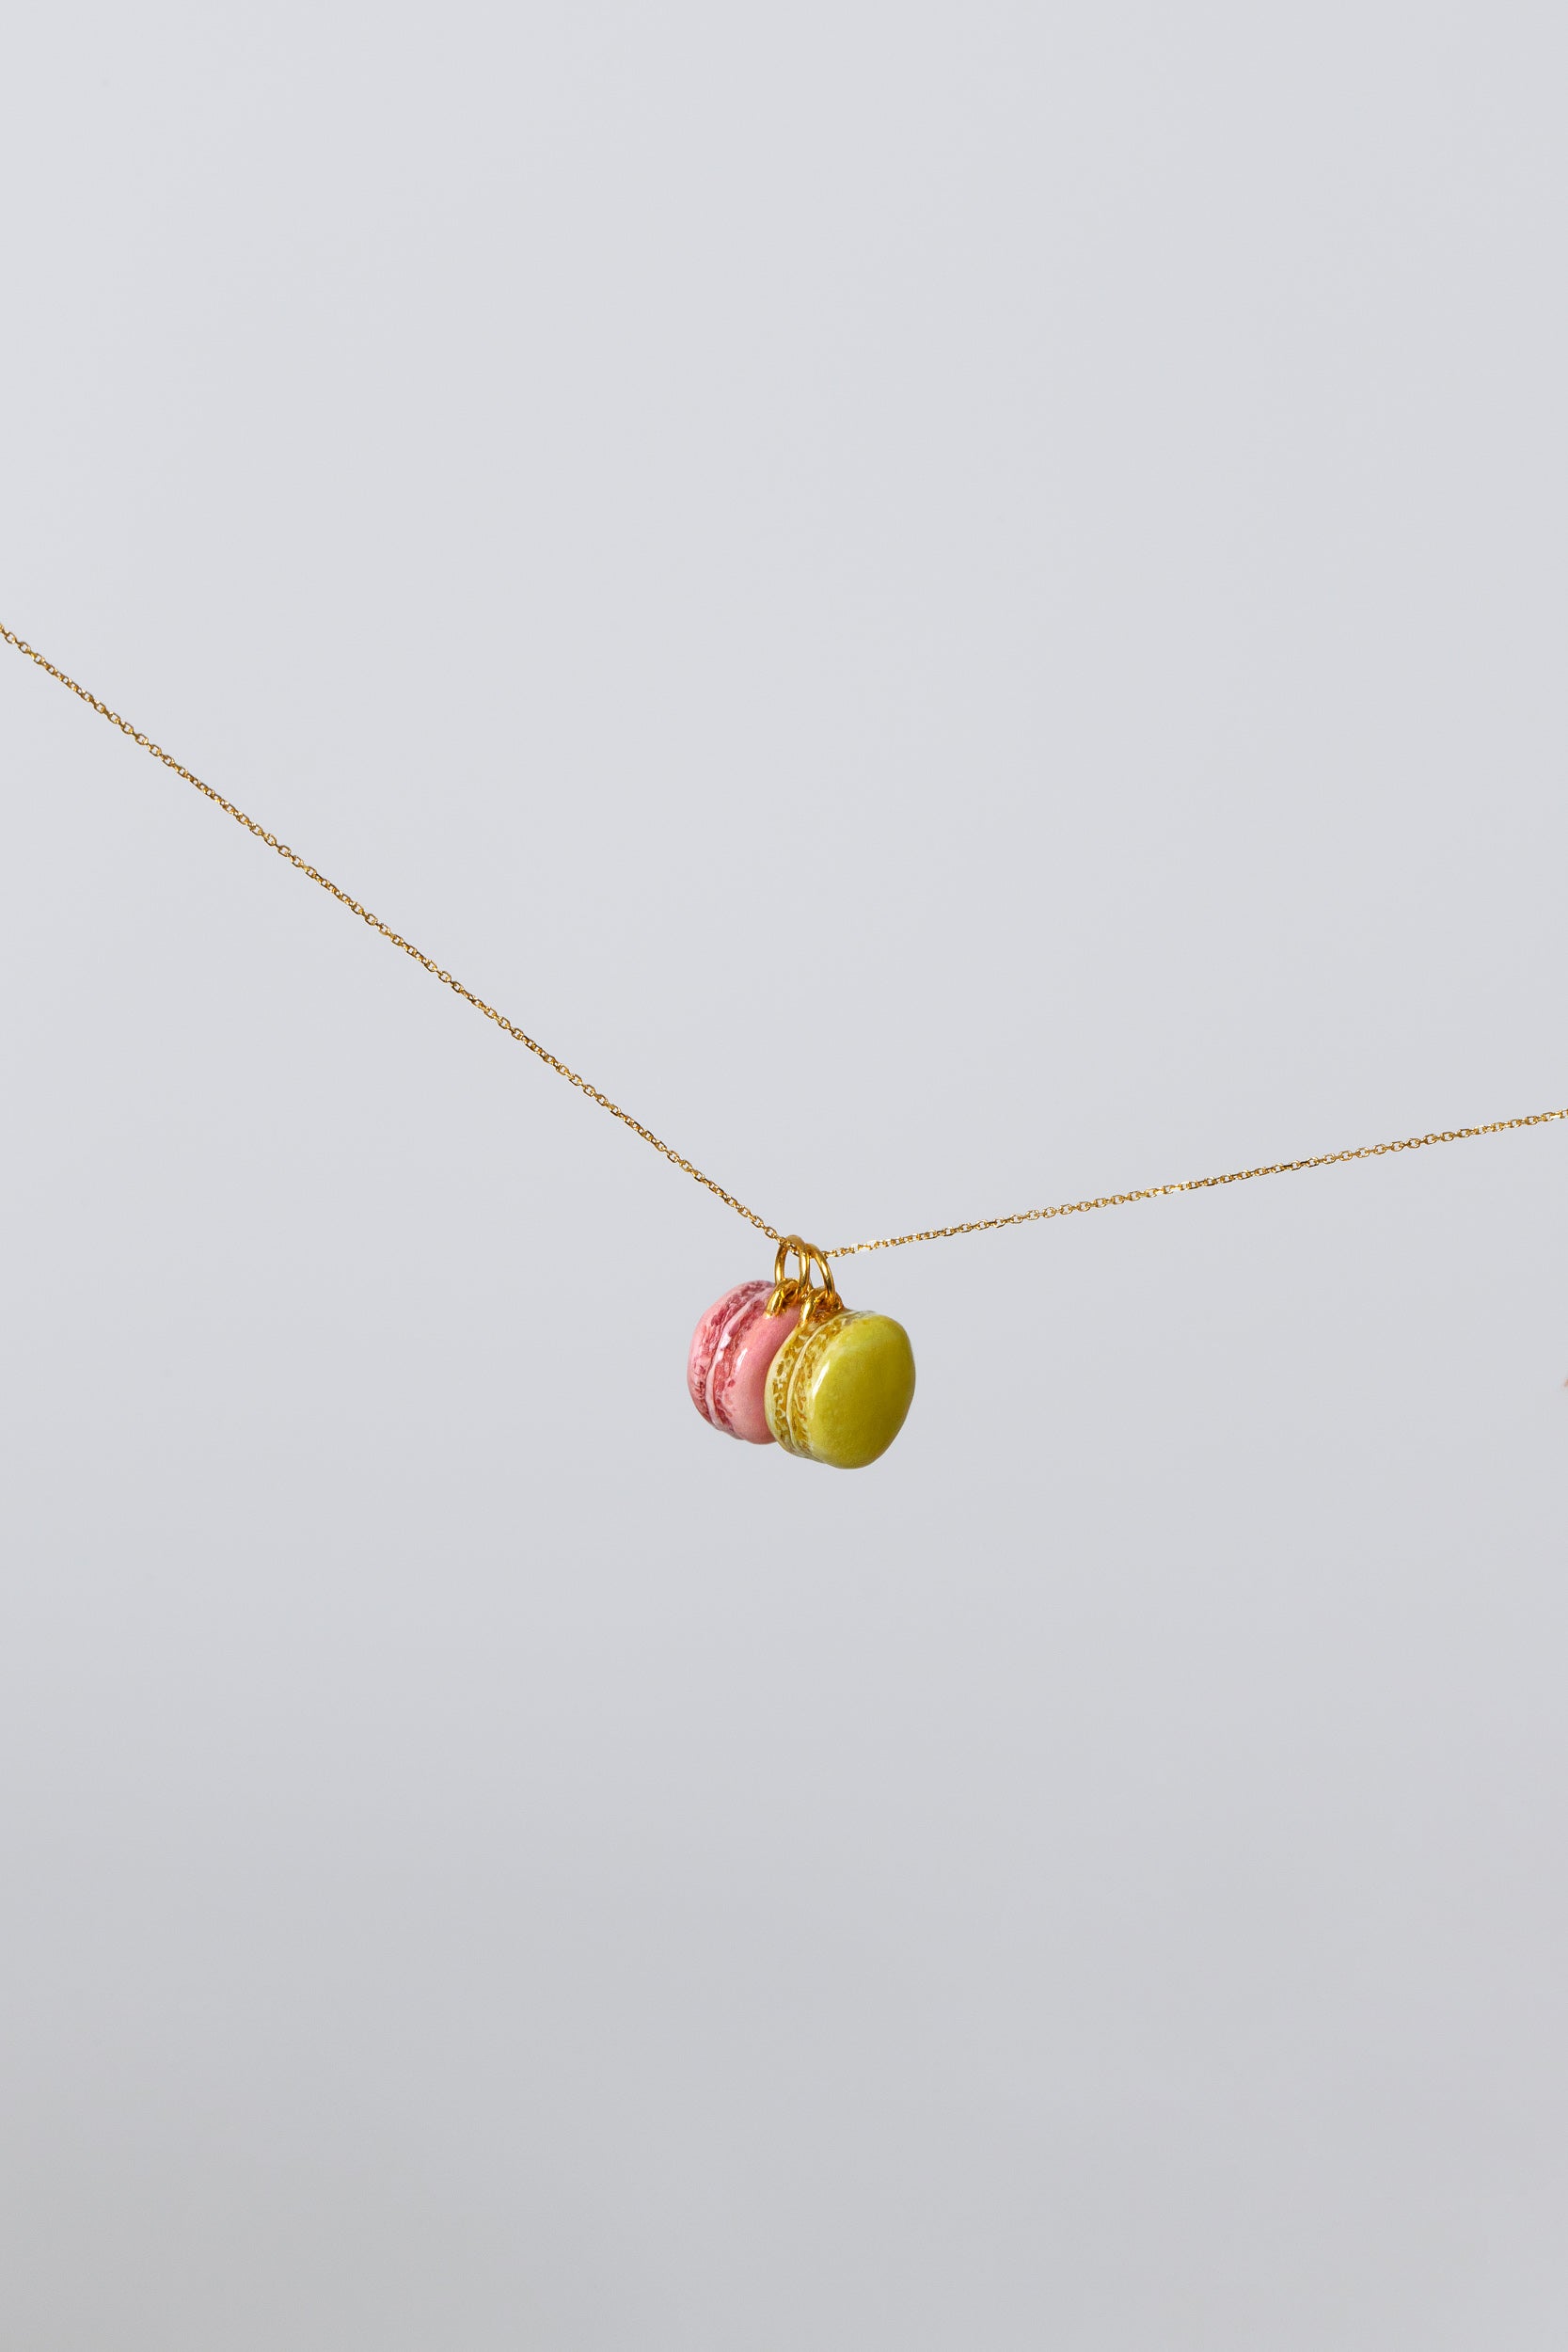 Product photo of Macaron Charms on a gold chain on light co